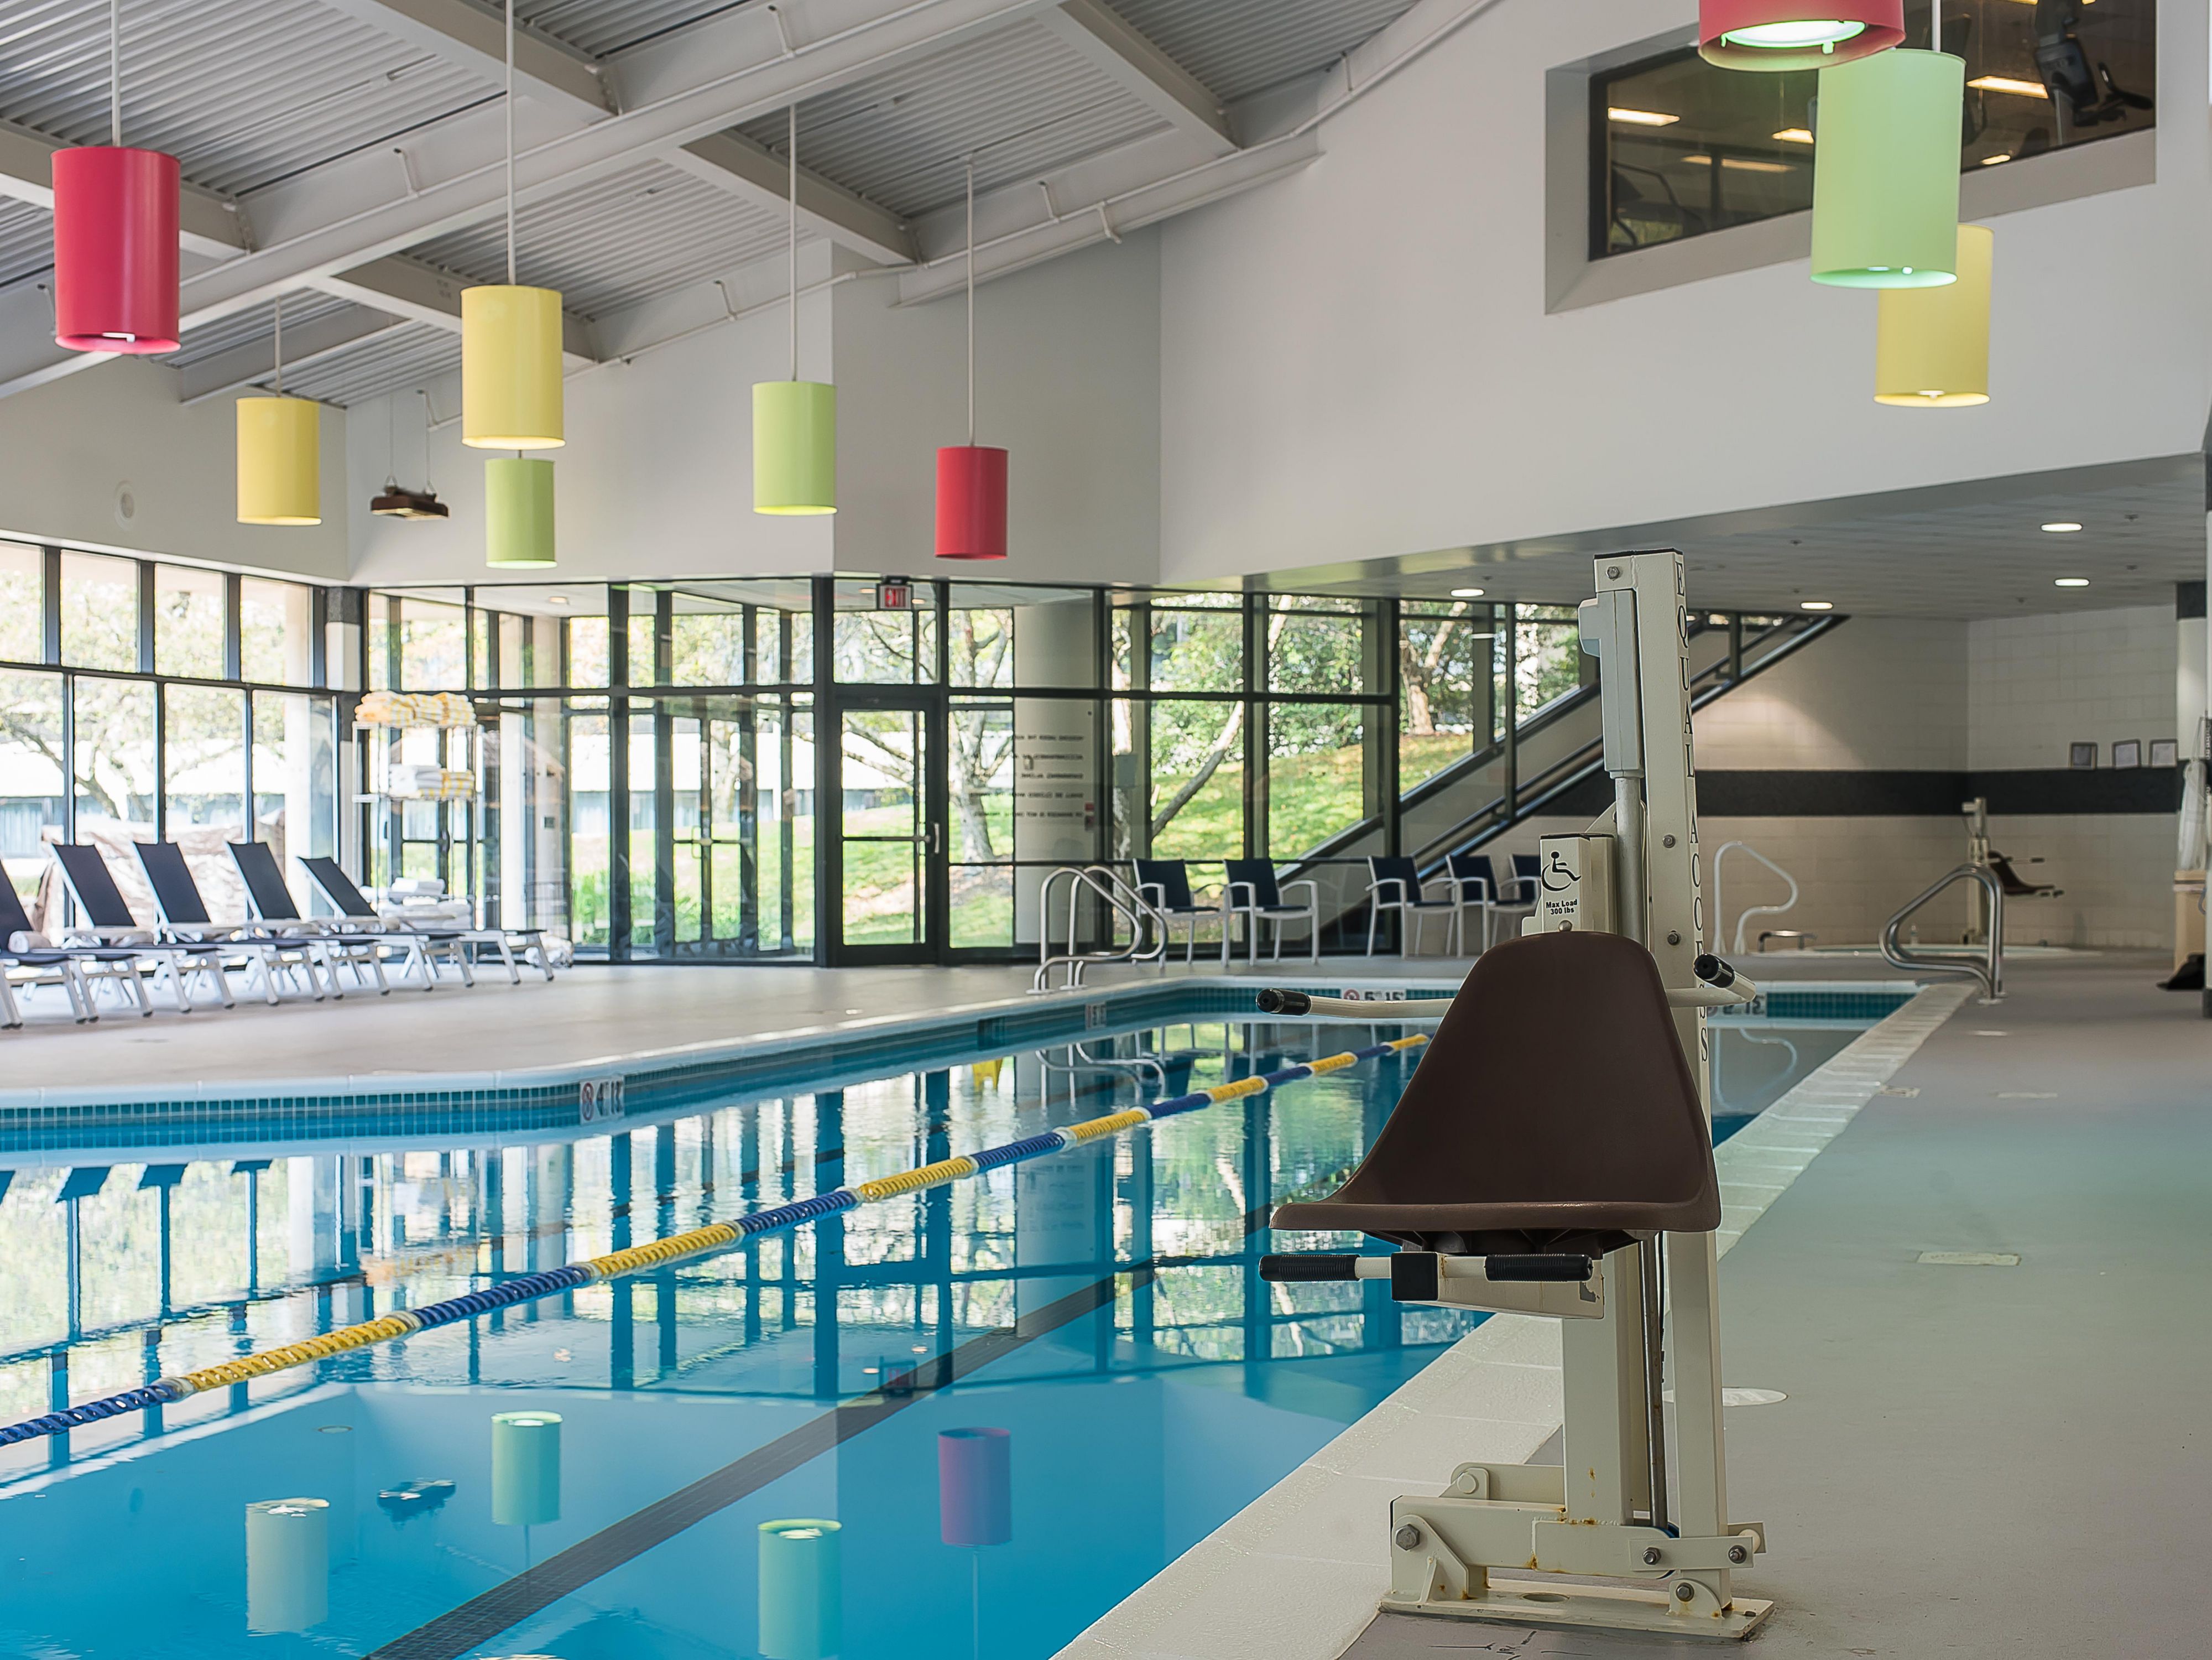 Rejuvenate in our Olympic size indoor heated lap pool and spa tub. The Fitness Center offers cardio, weight and strength training equipment to accommodate every workout regimen. Sports lovers will be excited to play squash, racquet ball and basketball on our private courts. Take in a game of tennis at the Princeton Tennis Academy!